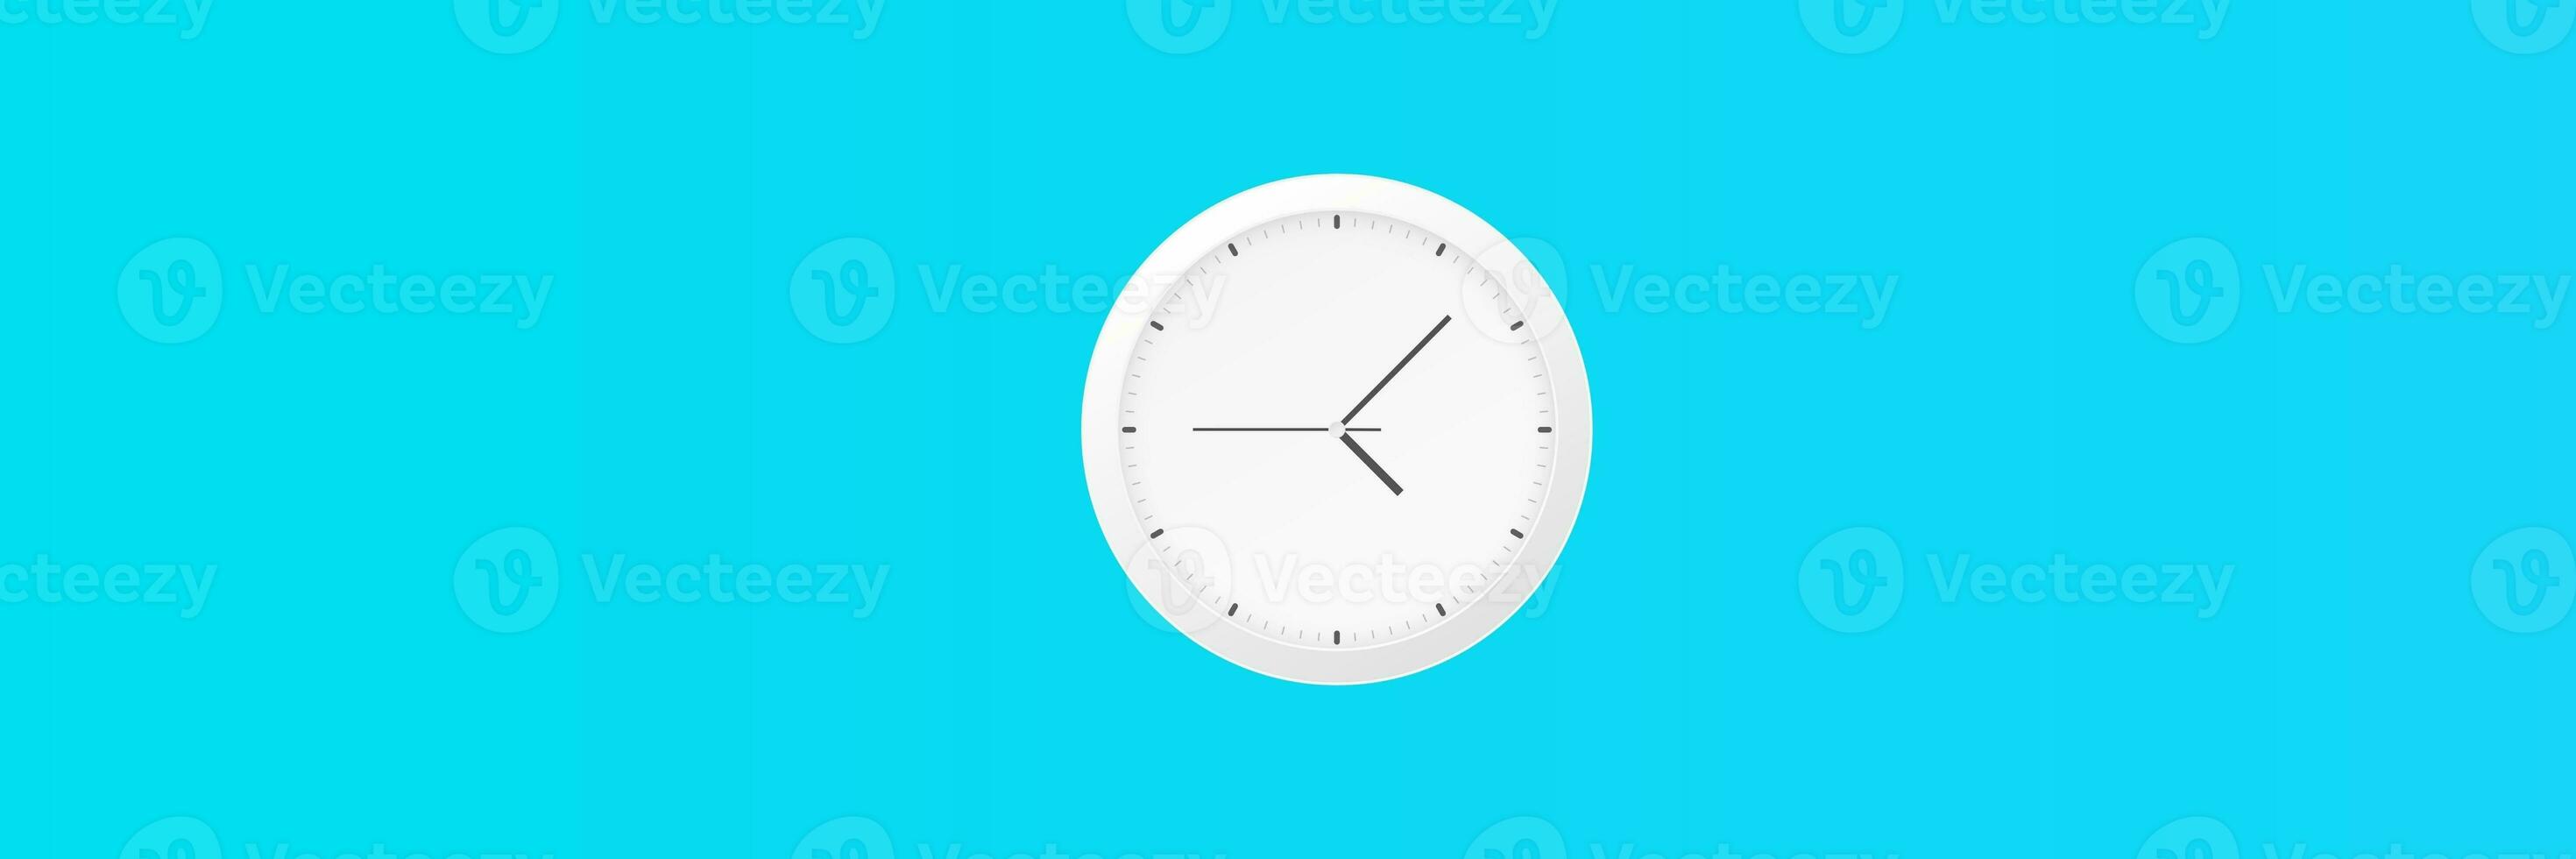 White wall clock with black second hand hanging on the wall. Minimalist flat lay image of plastic wall clock over blue turquiose background with copy space and central composition. photo